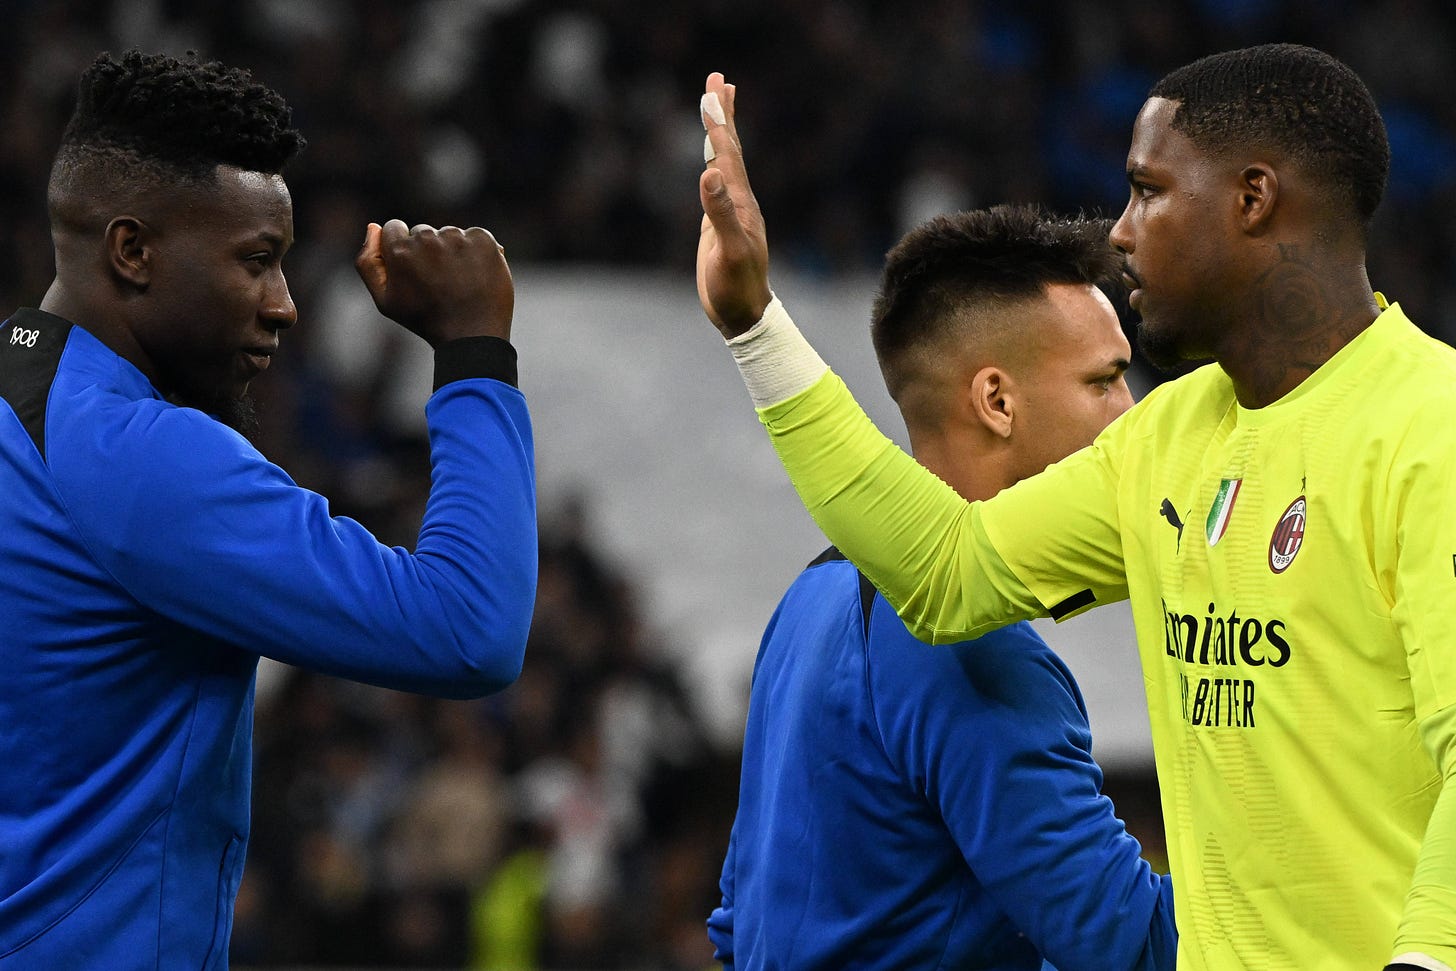 Pulse Sports Nigeria on Twitter: "Which of these goalkeepers performed  better tonight? 🇨🇲 Andre Onana 🔵⚫️ 🇫🇷 Mike Maignan 🔴⚫️  #PulseSportsNigeria #InterMilan #MilanDerby #UCL #Onana #Maignan  https://t.co/ylXalavdU0" / Twitter